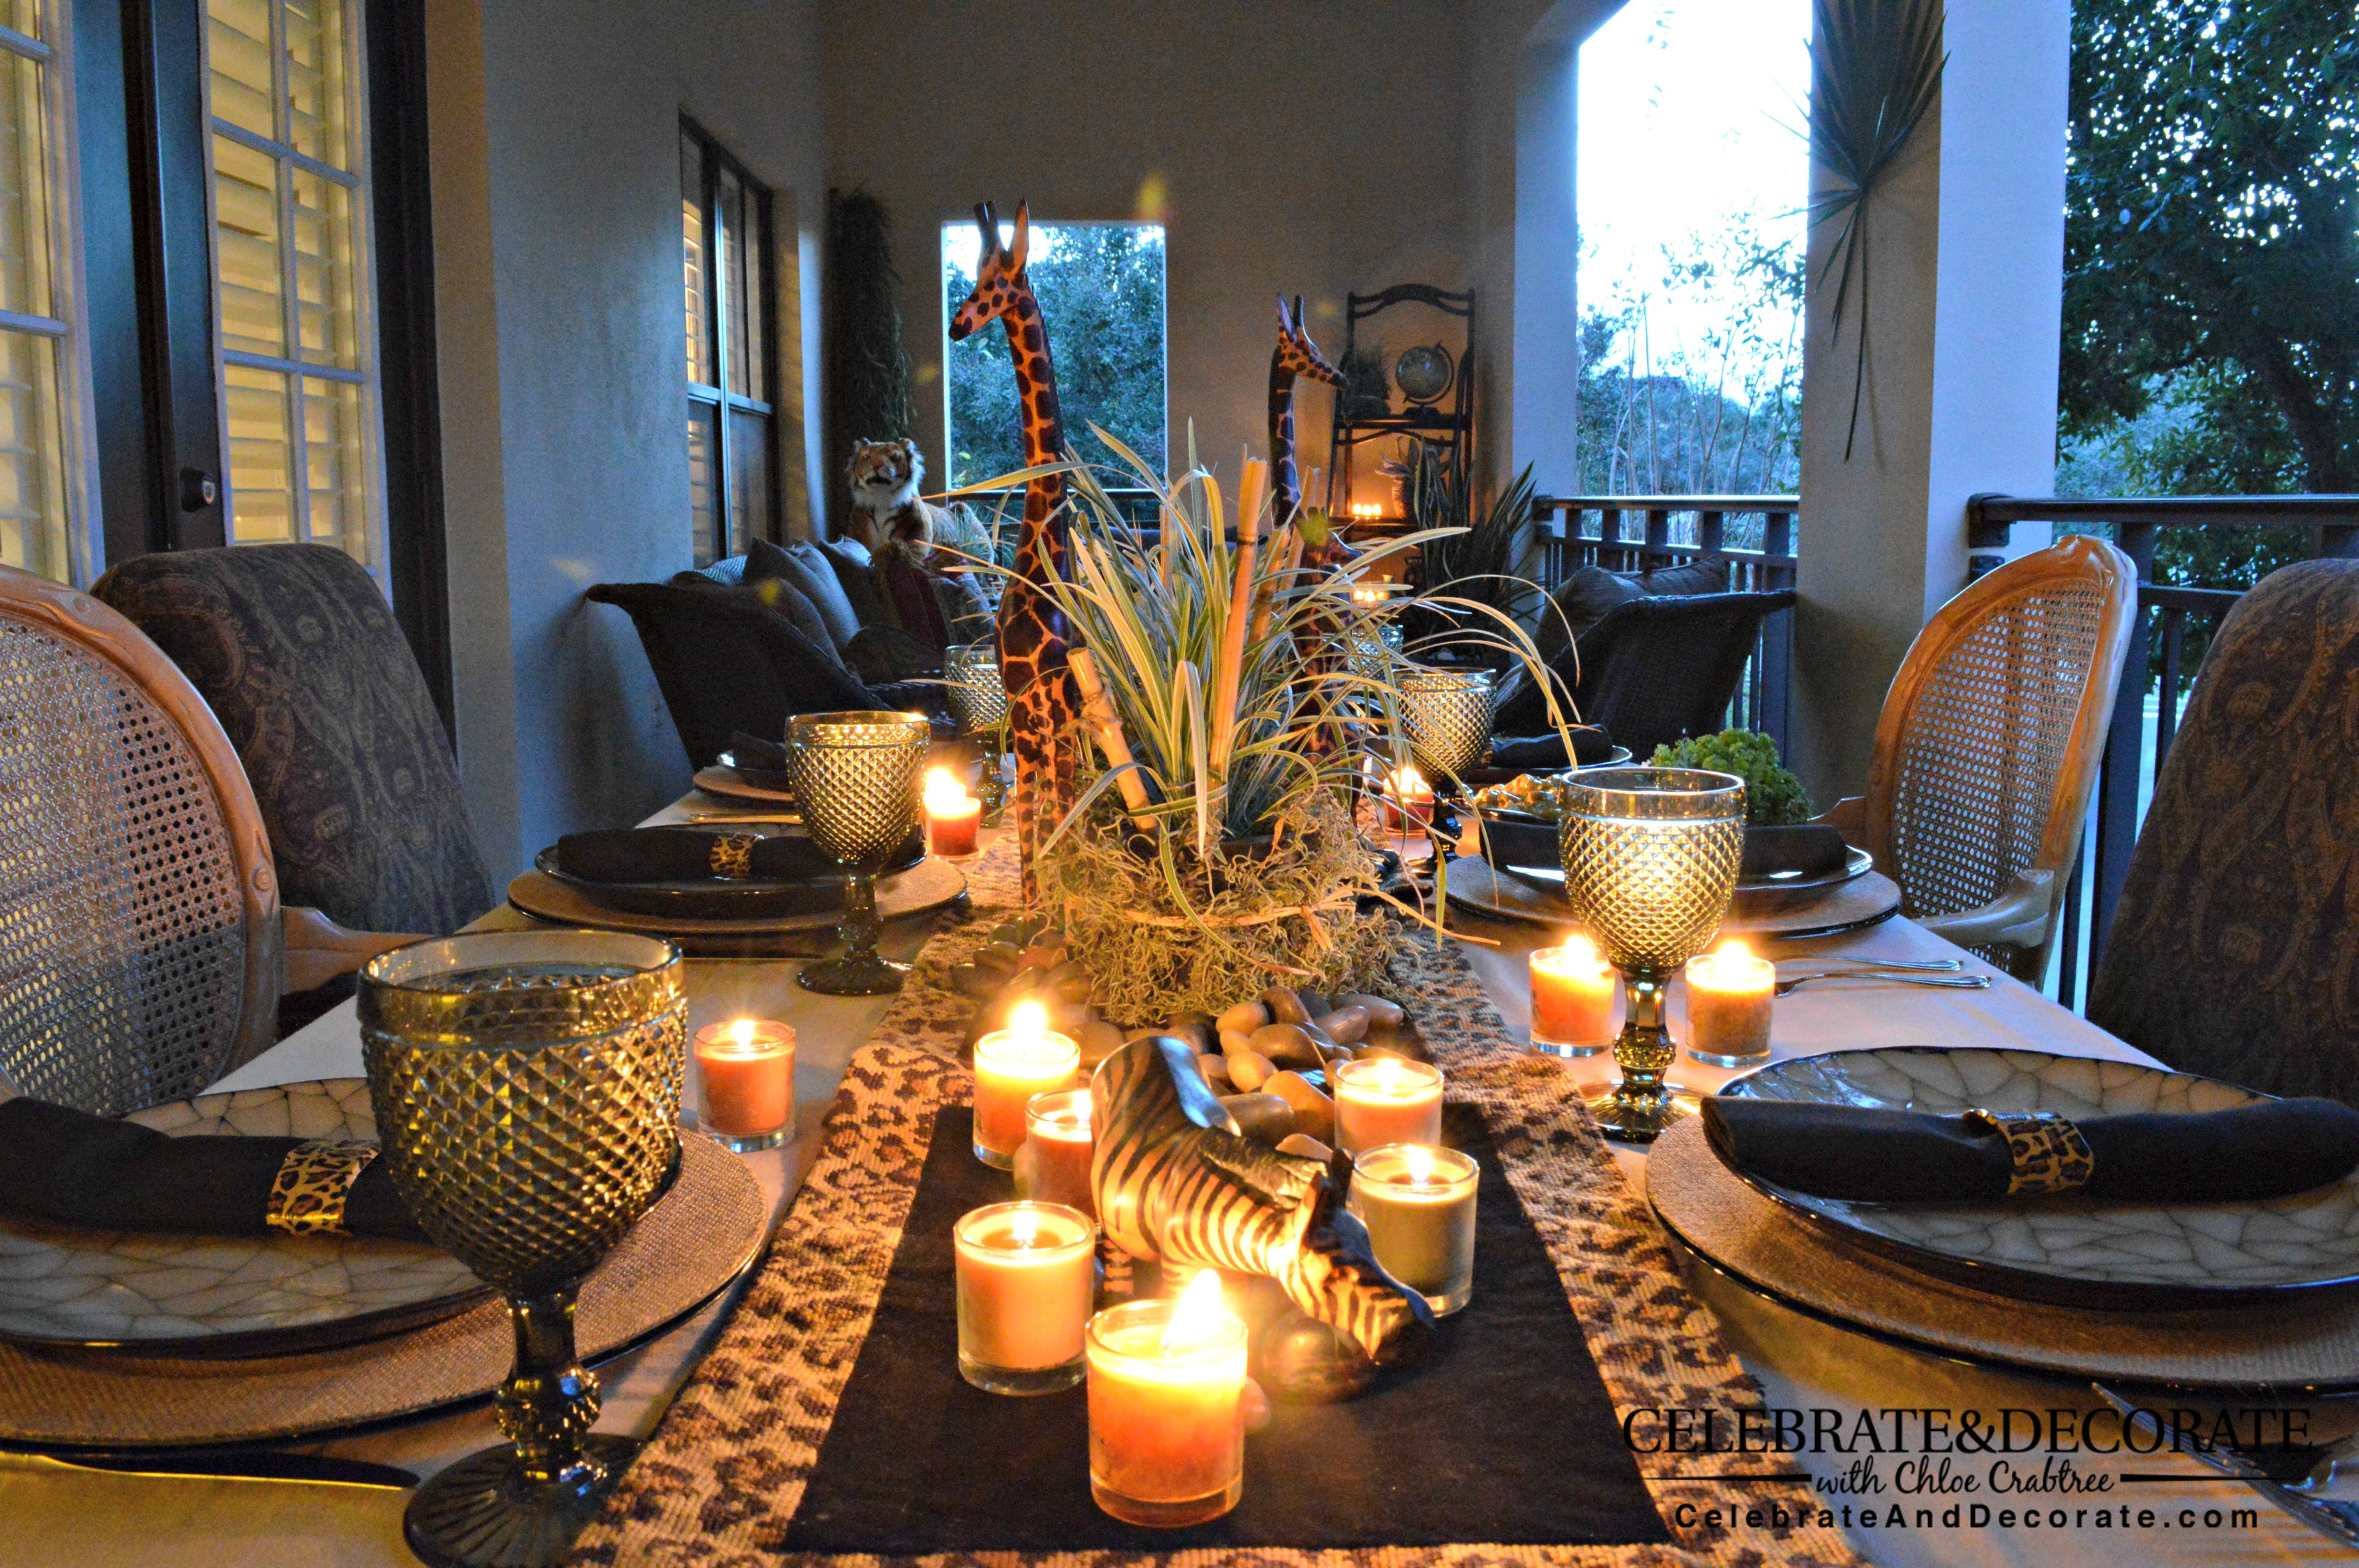 Dinner Party Decor Ideas
 Safari Party or Jungle party perfect for an outdoor summer